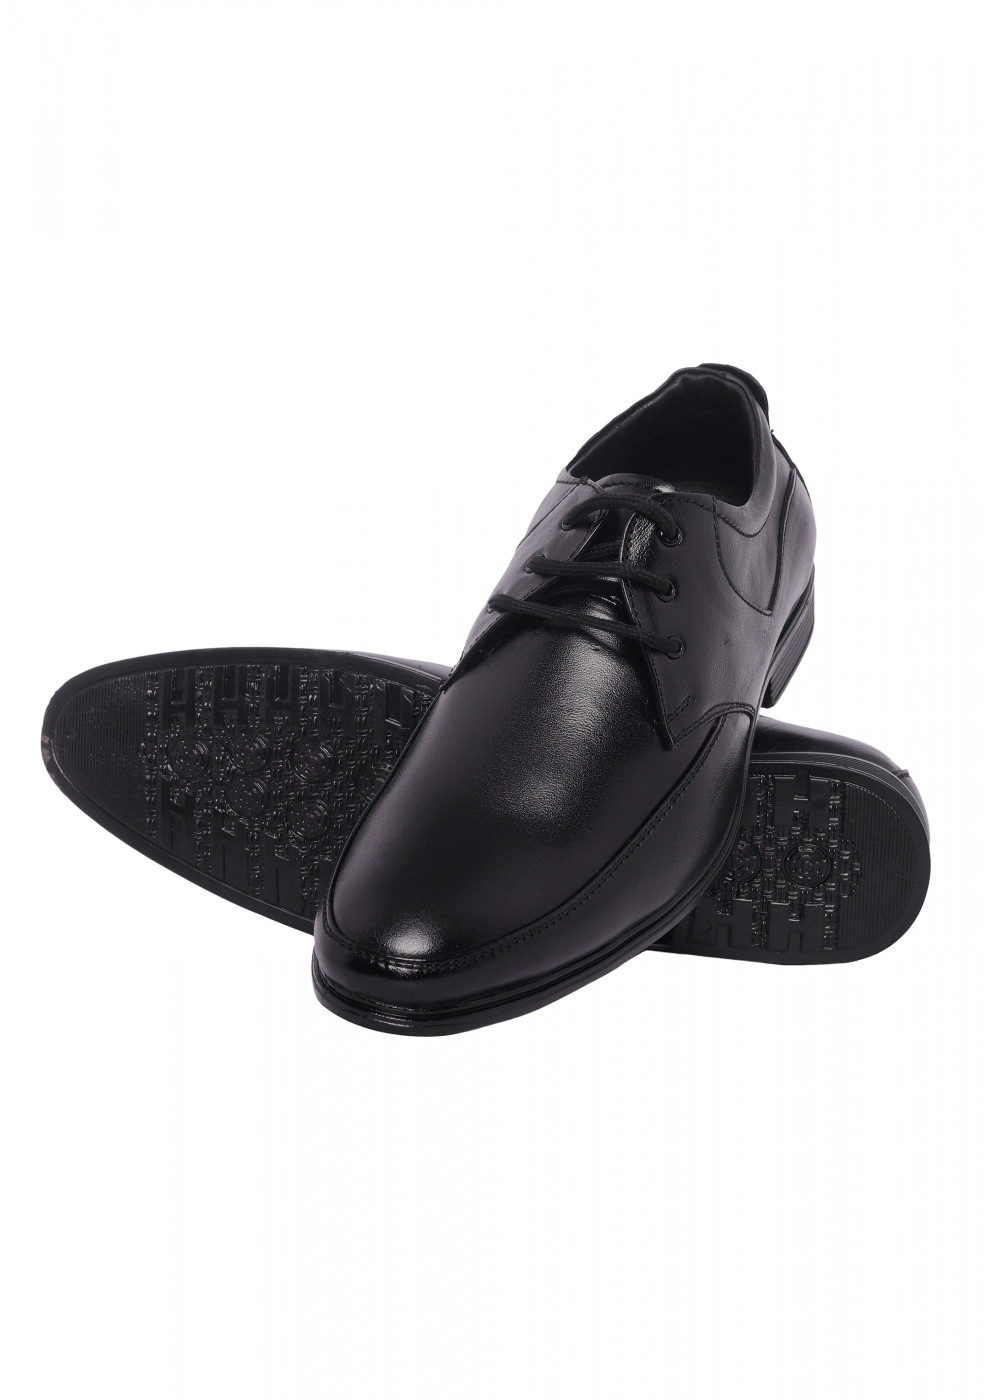 XSTOM Lather Formal Laceup Black Shoes